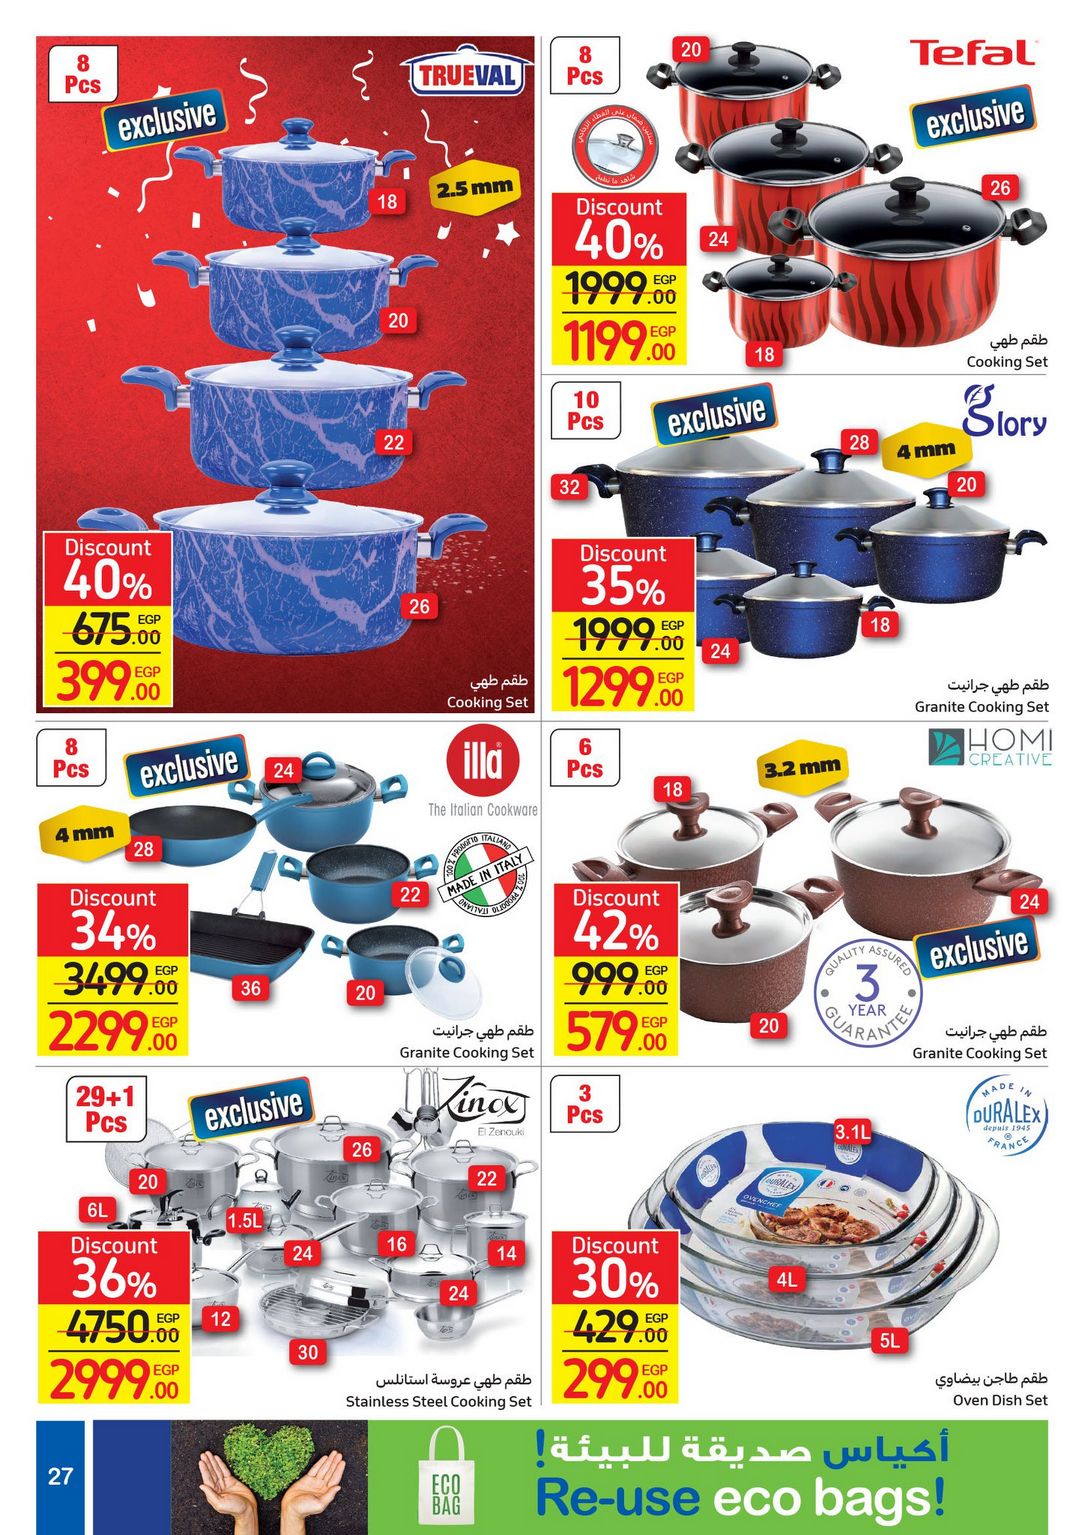 Carrefour Anniversary Offers till 18/2/2021 | Carrefour Egypt 29